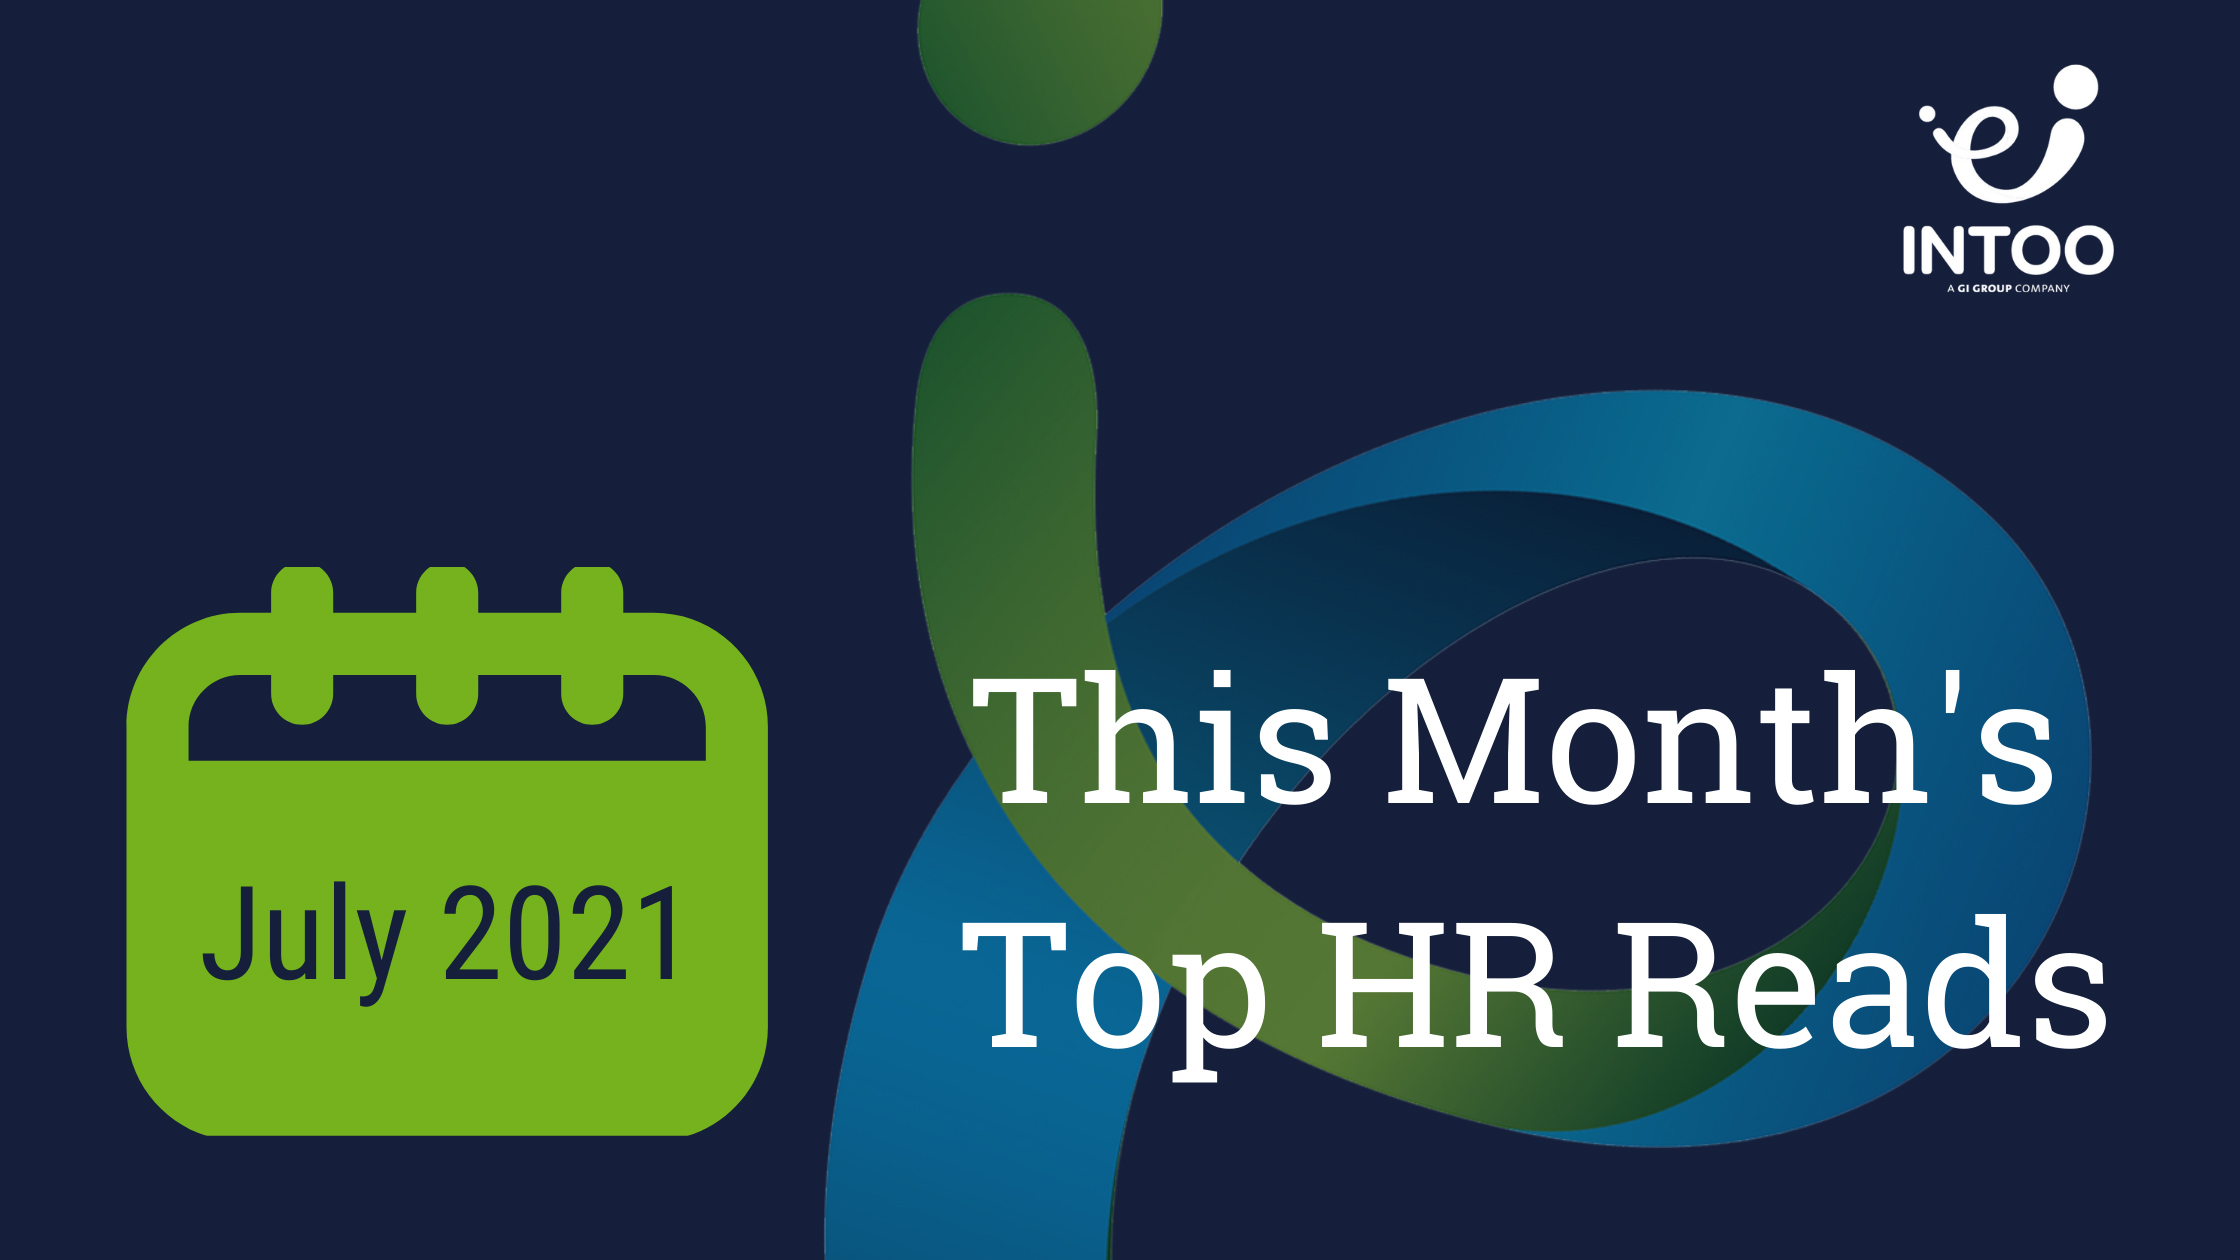 Top HR Reads for July 2021